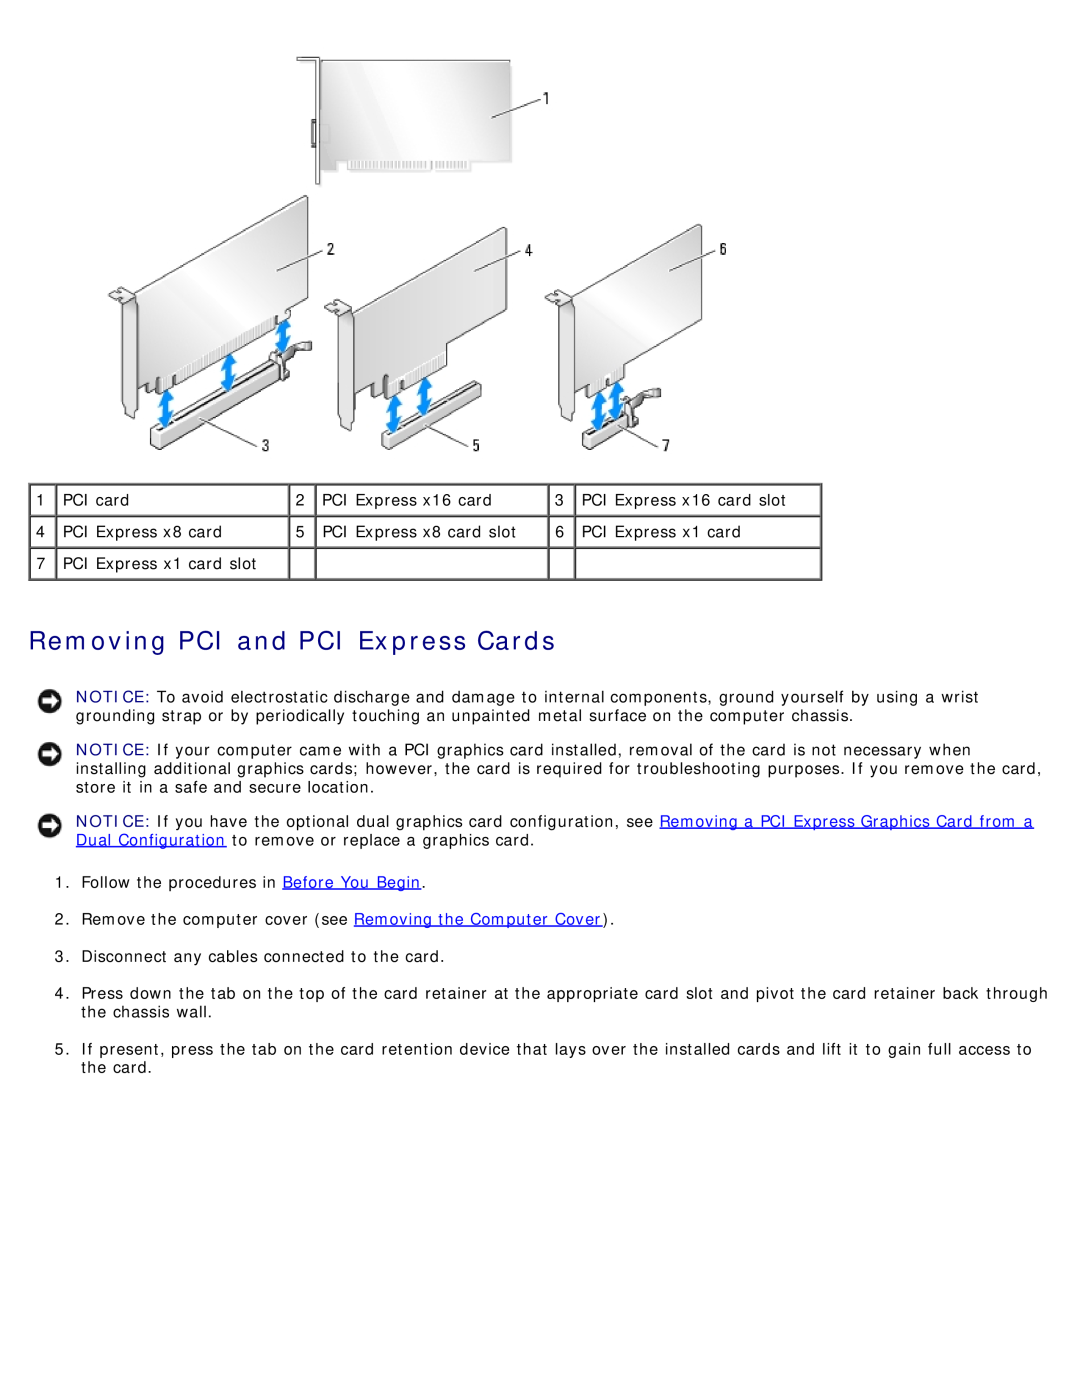 Dell DCDO, 710 H2C service manual Removing PCI and PCI Express Cards, PCI Express x16 card slot 